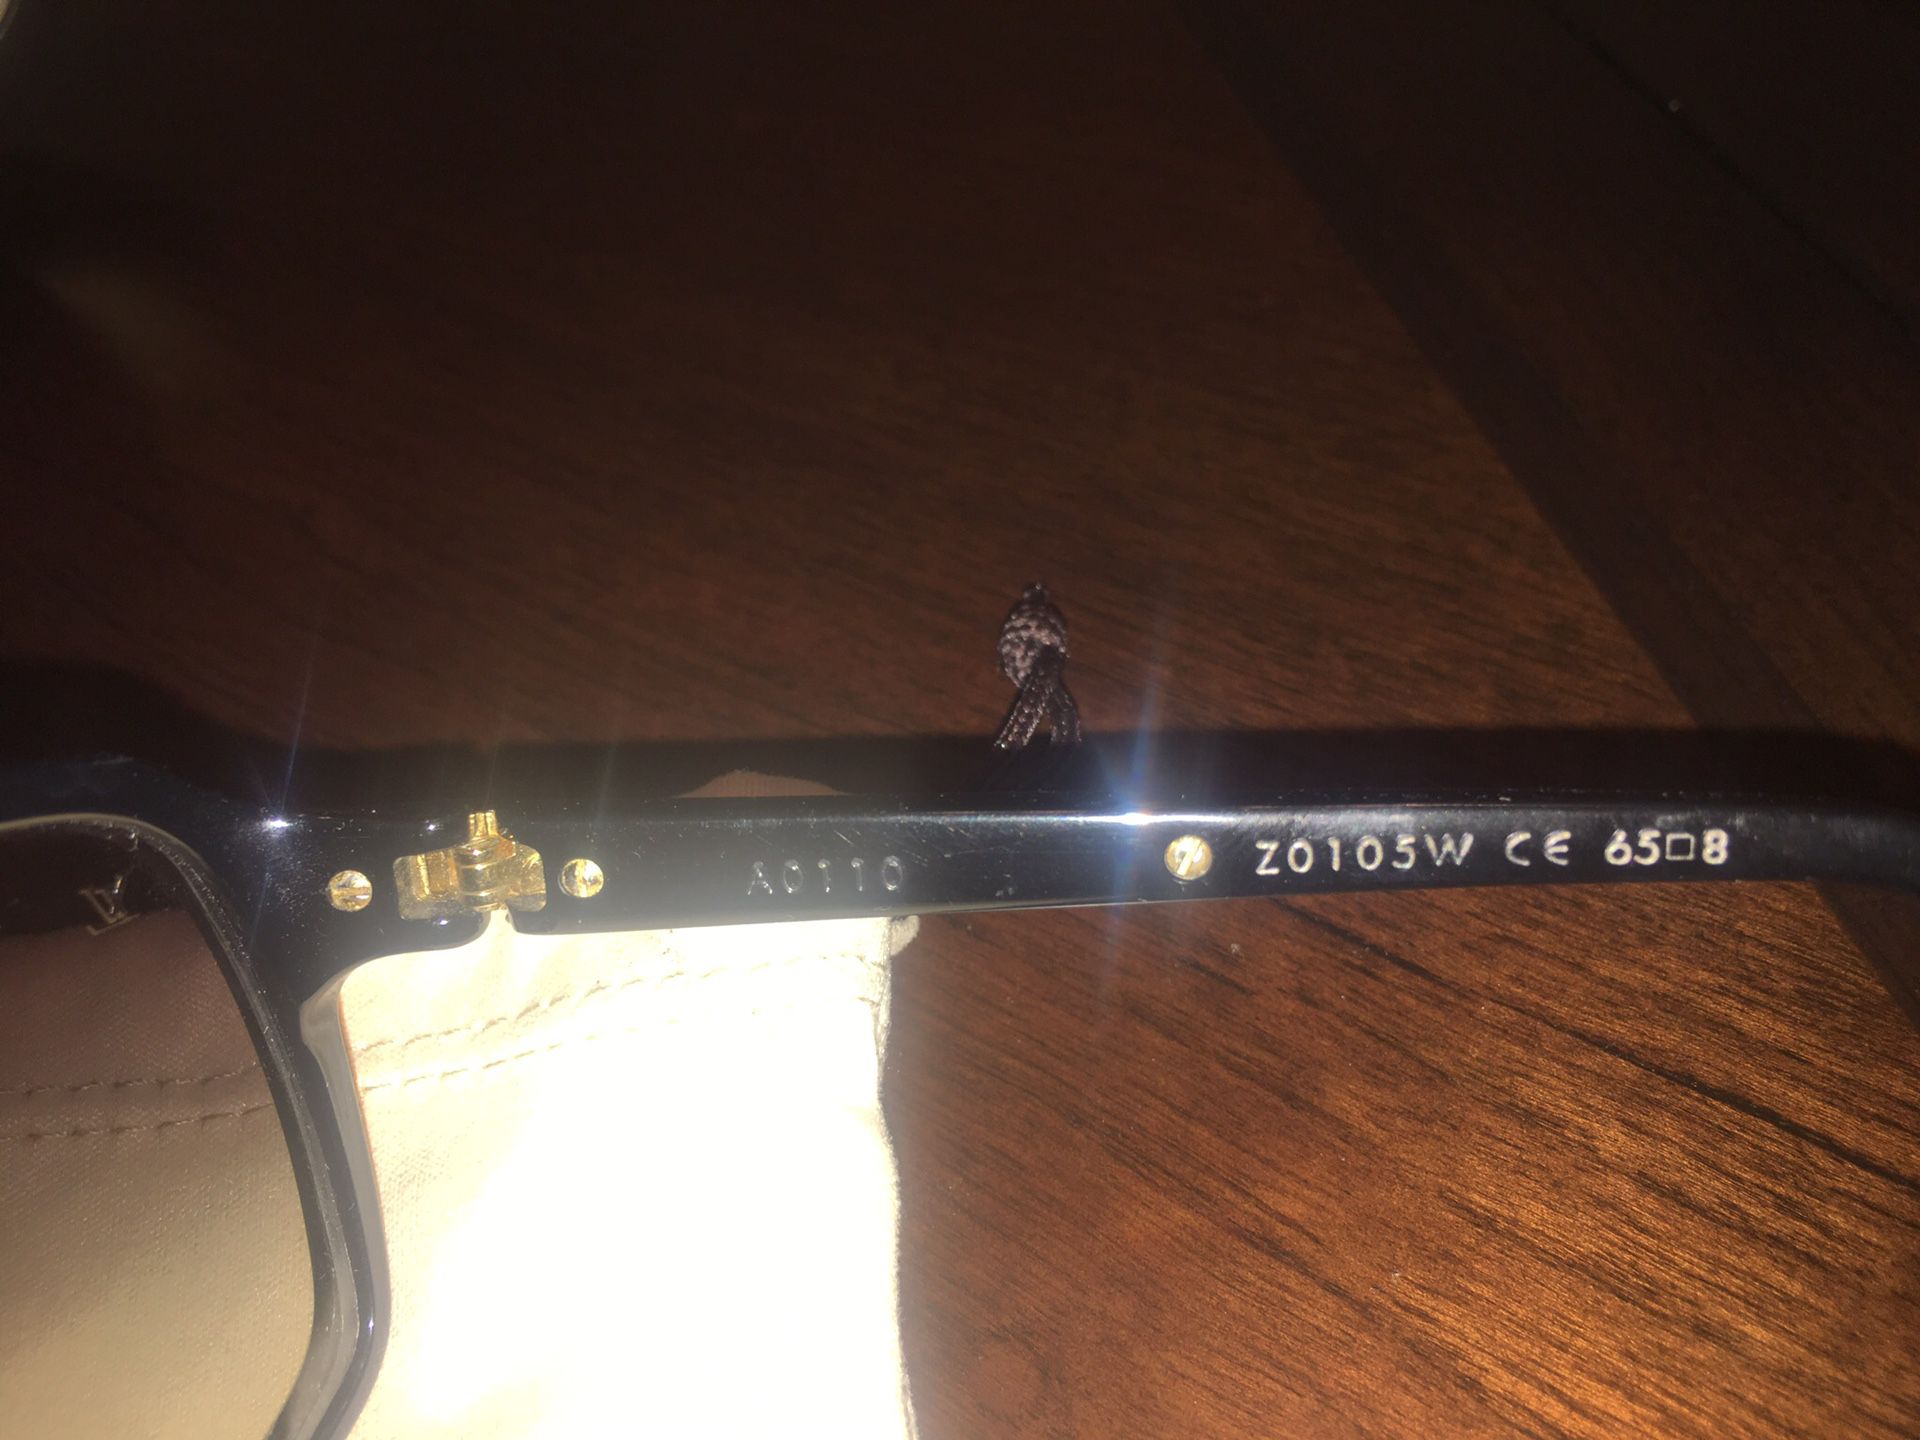 Louis Vuitton 1.1 Evidence Sunglasses for Sale in Warren, OH - OfferUp